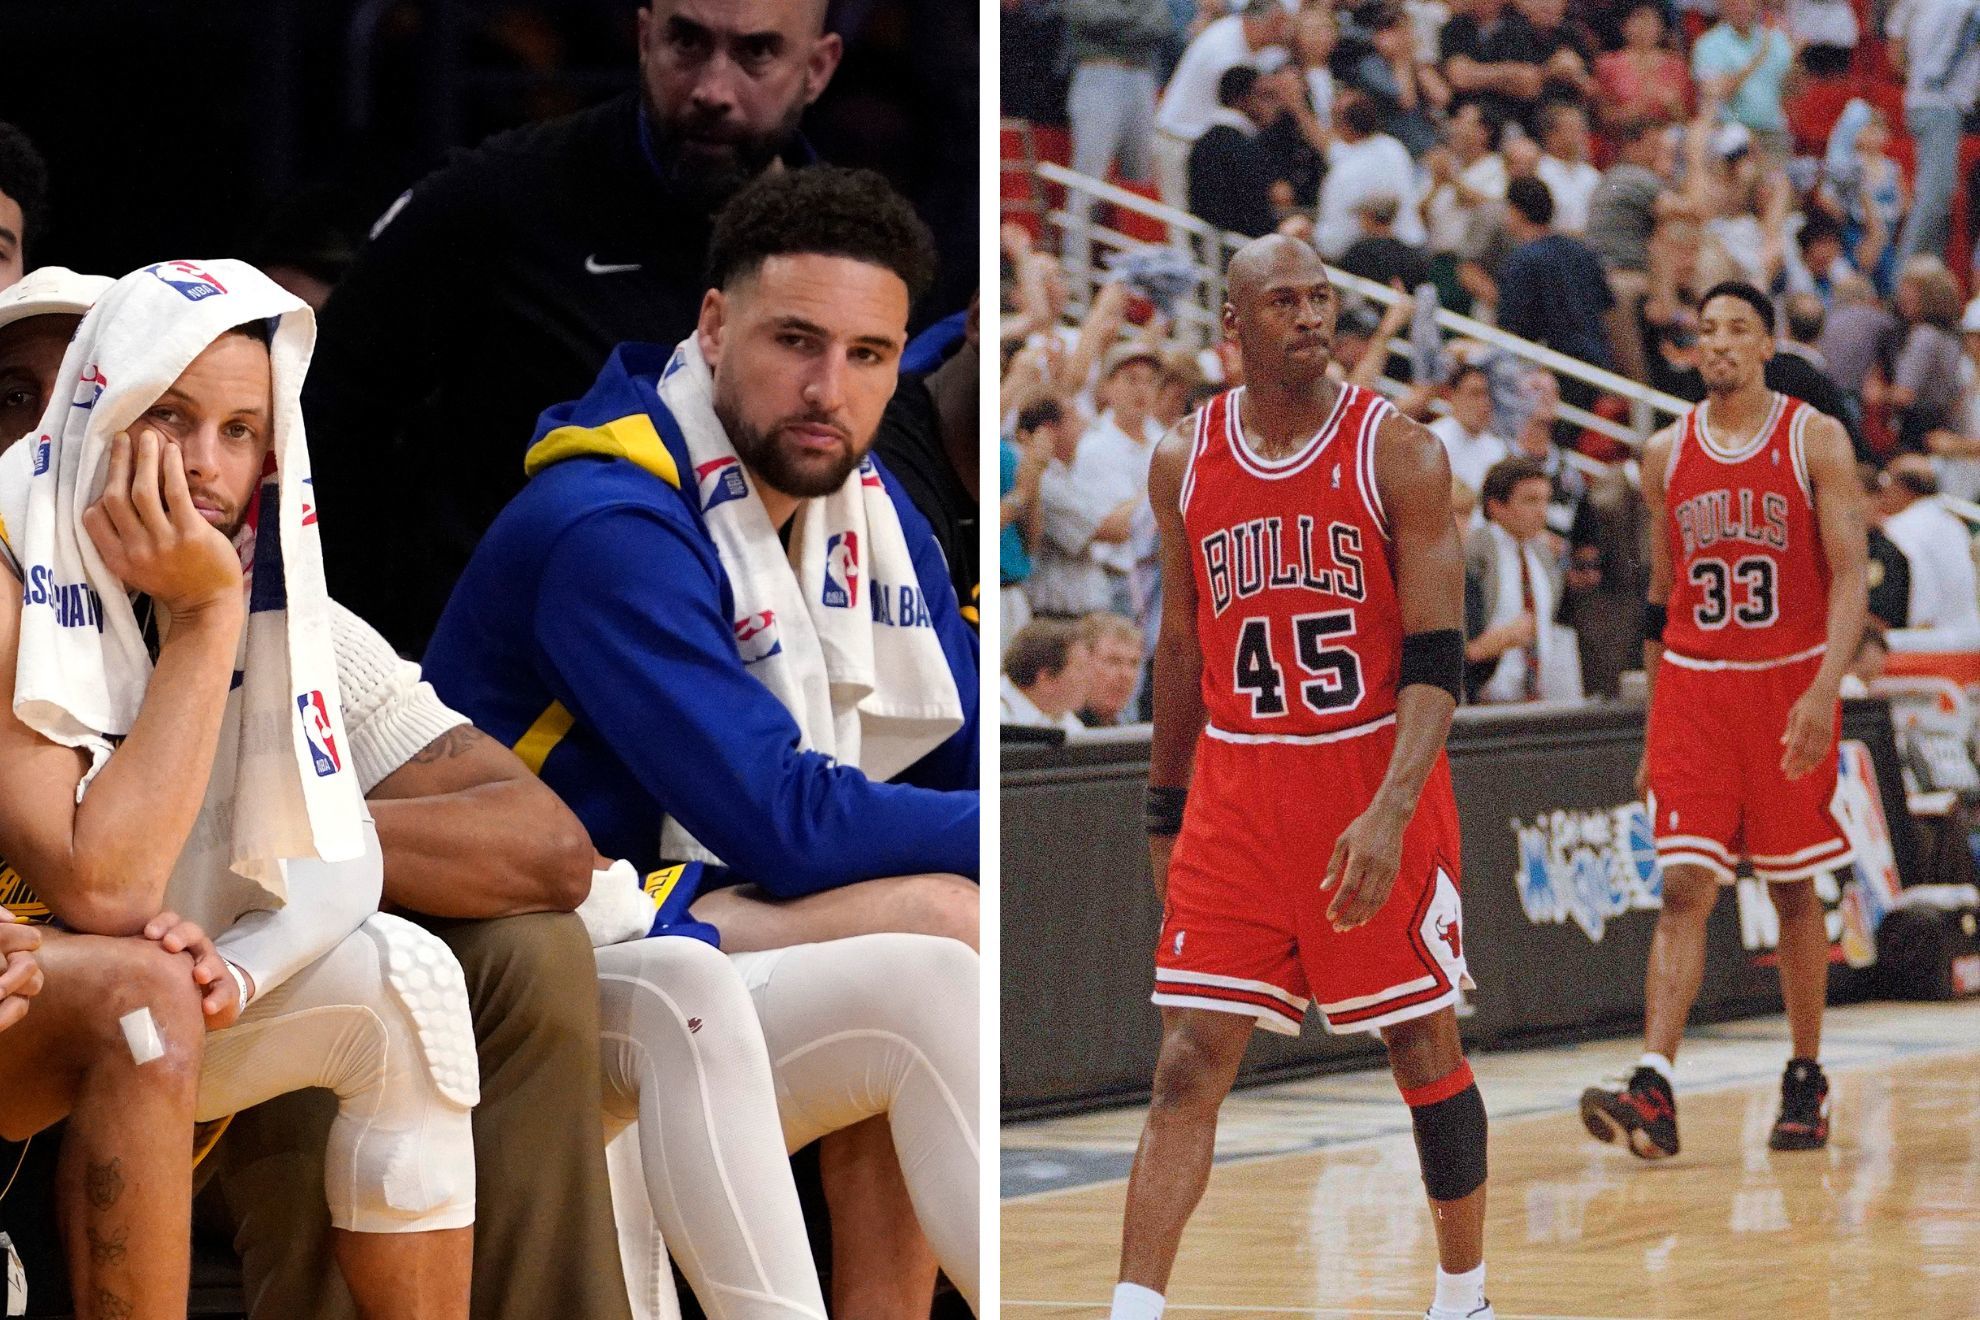 Pat McAfee thinks Klay Thompson will resent Steph Curry like Scottie Pippen does Michael Jordan